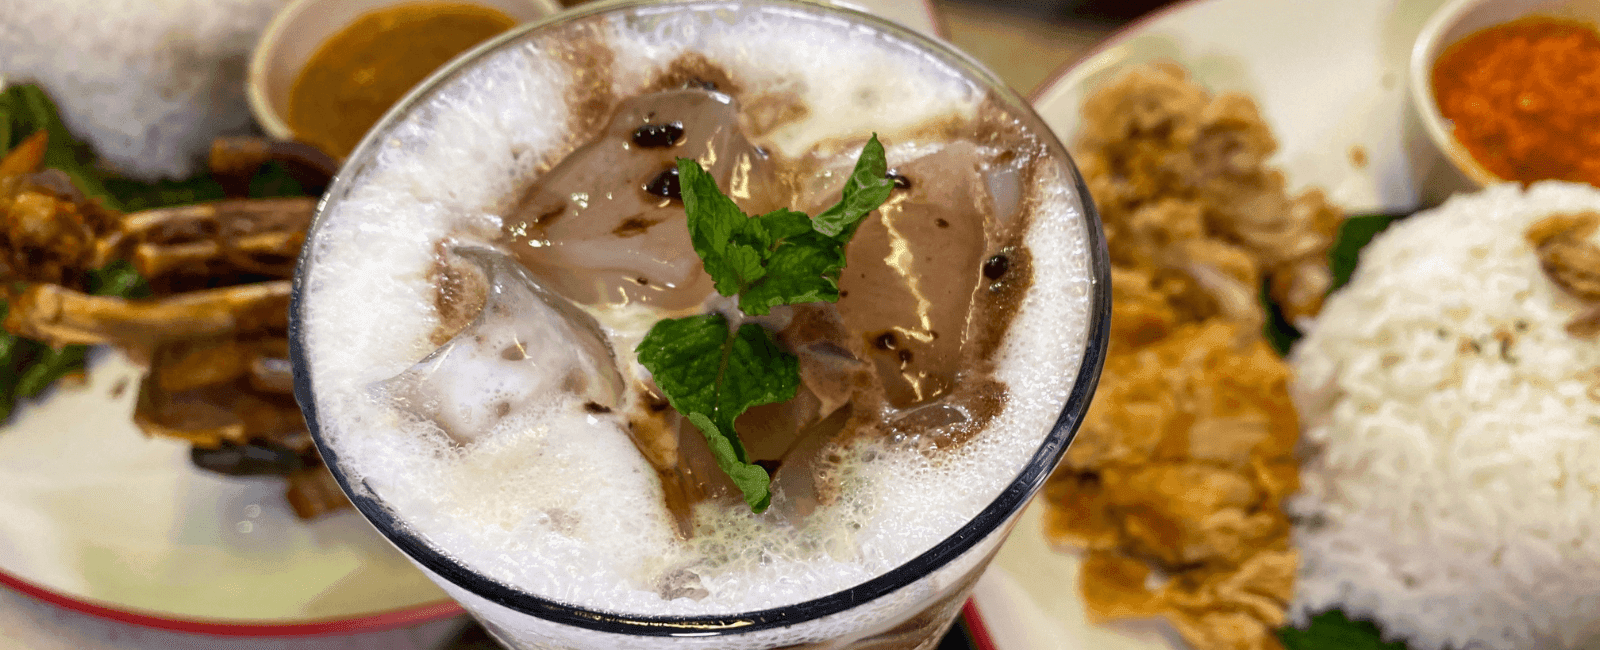 Mushroom Cocktails You Can Easily Make at Home